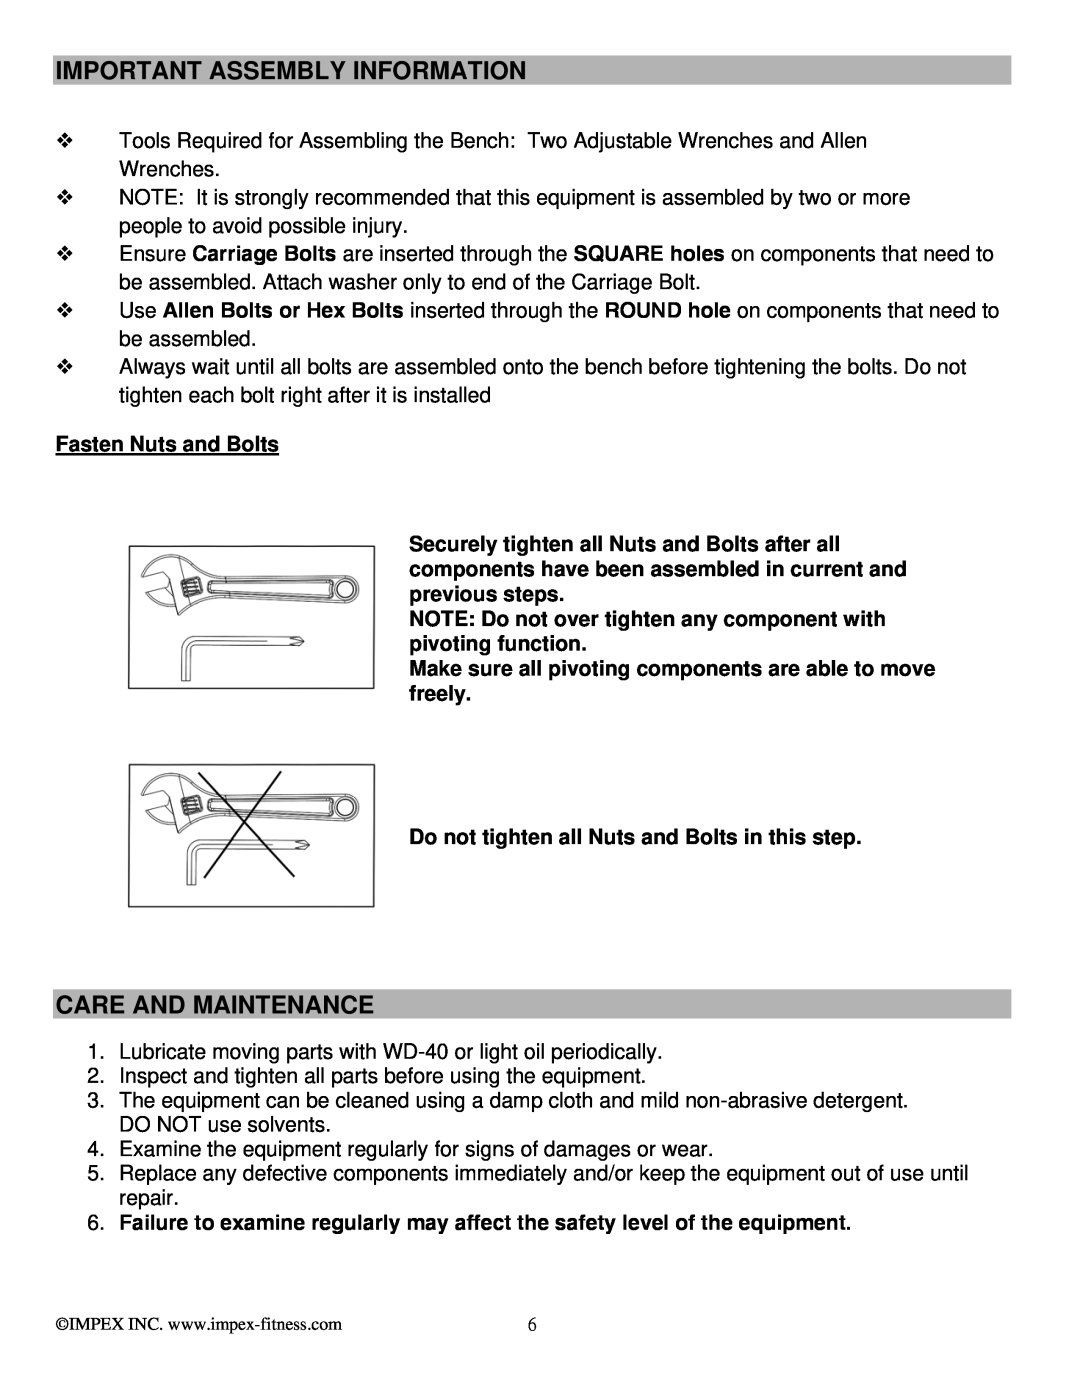 Impex MKB-2081 manual Important Assembly Information, Care And Maintenance, Fasten Nuts and Bolts 